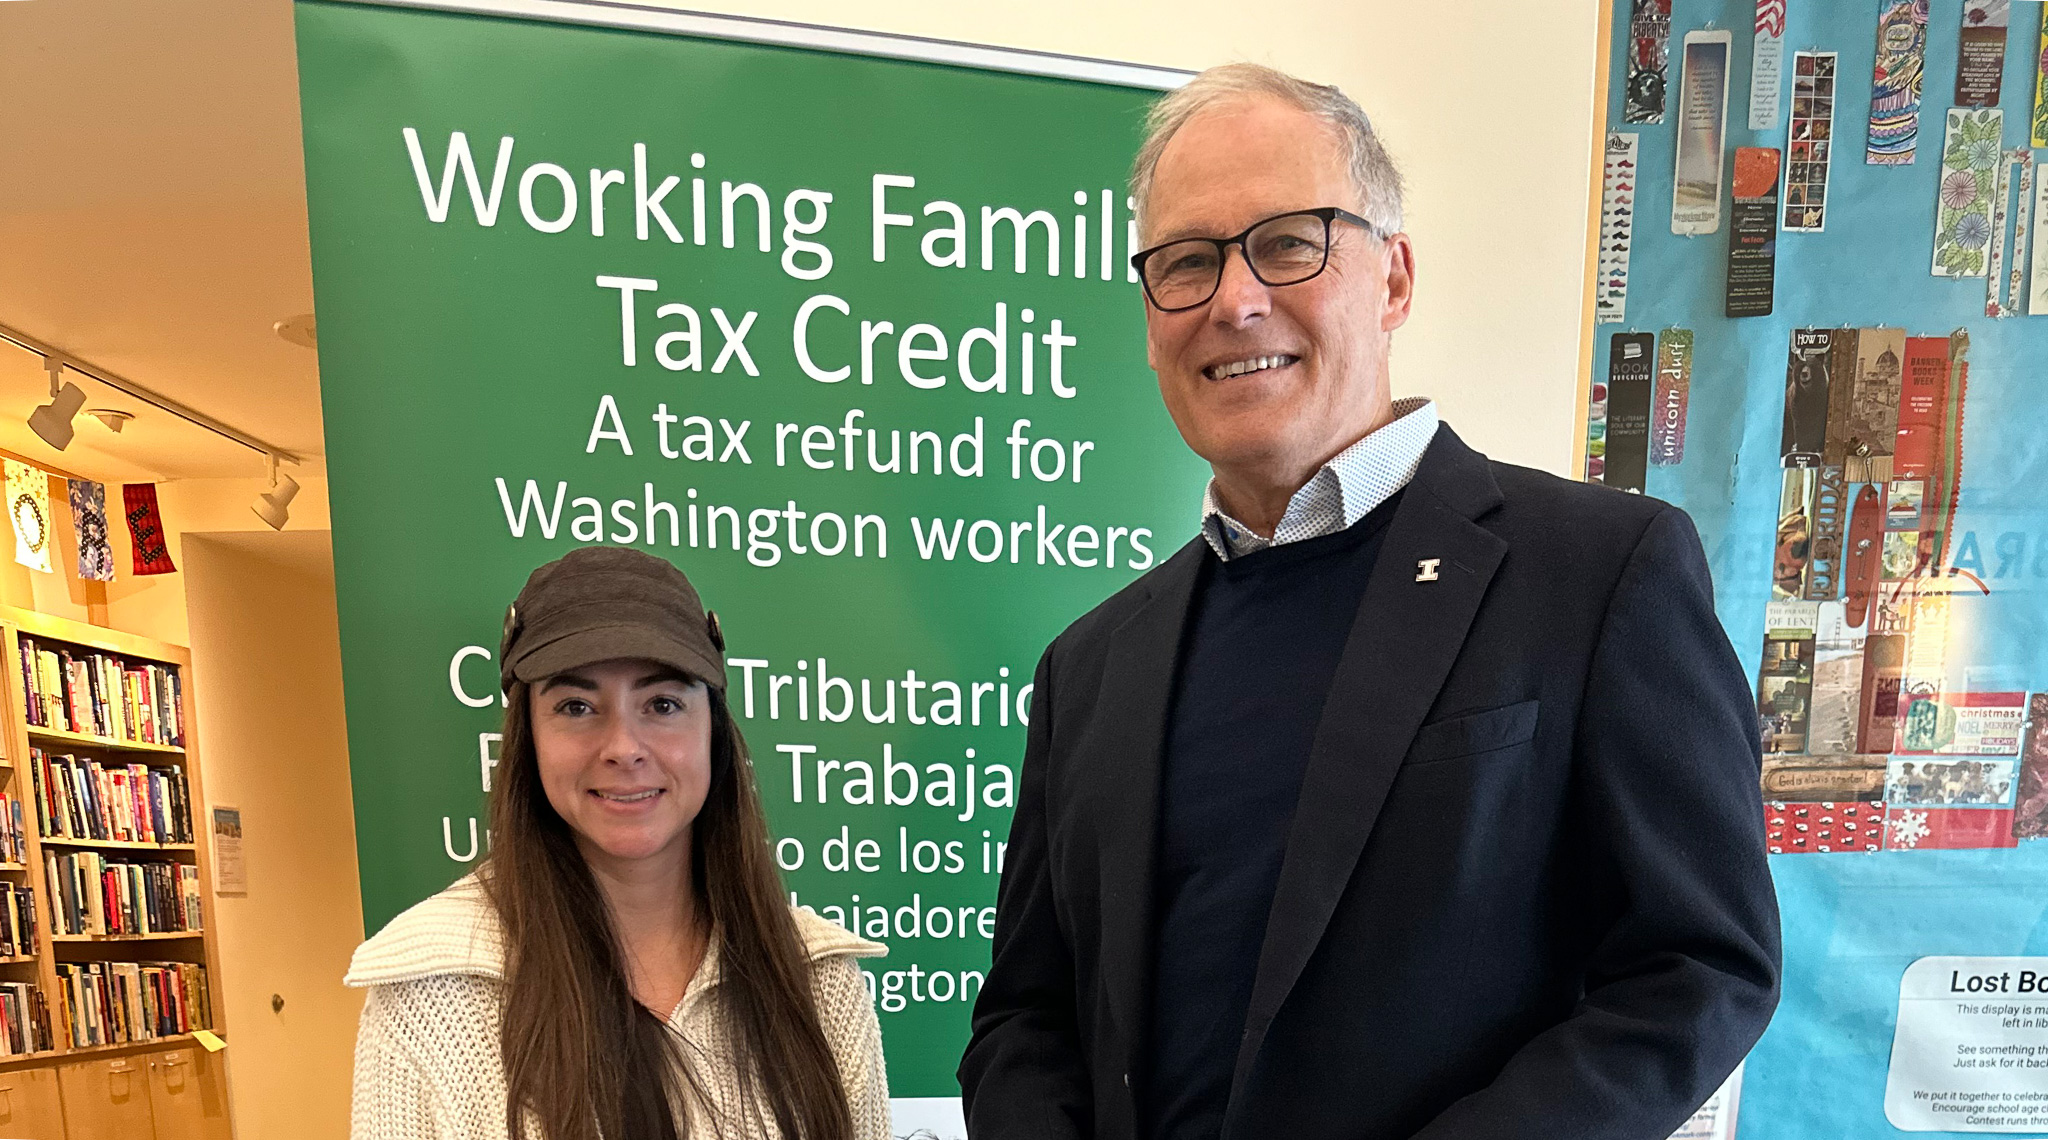 Two people stands in front of a sign displaying "Working Family Tax Credit," representing financial support for families.